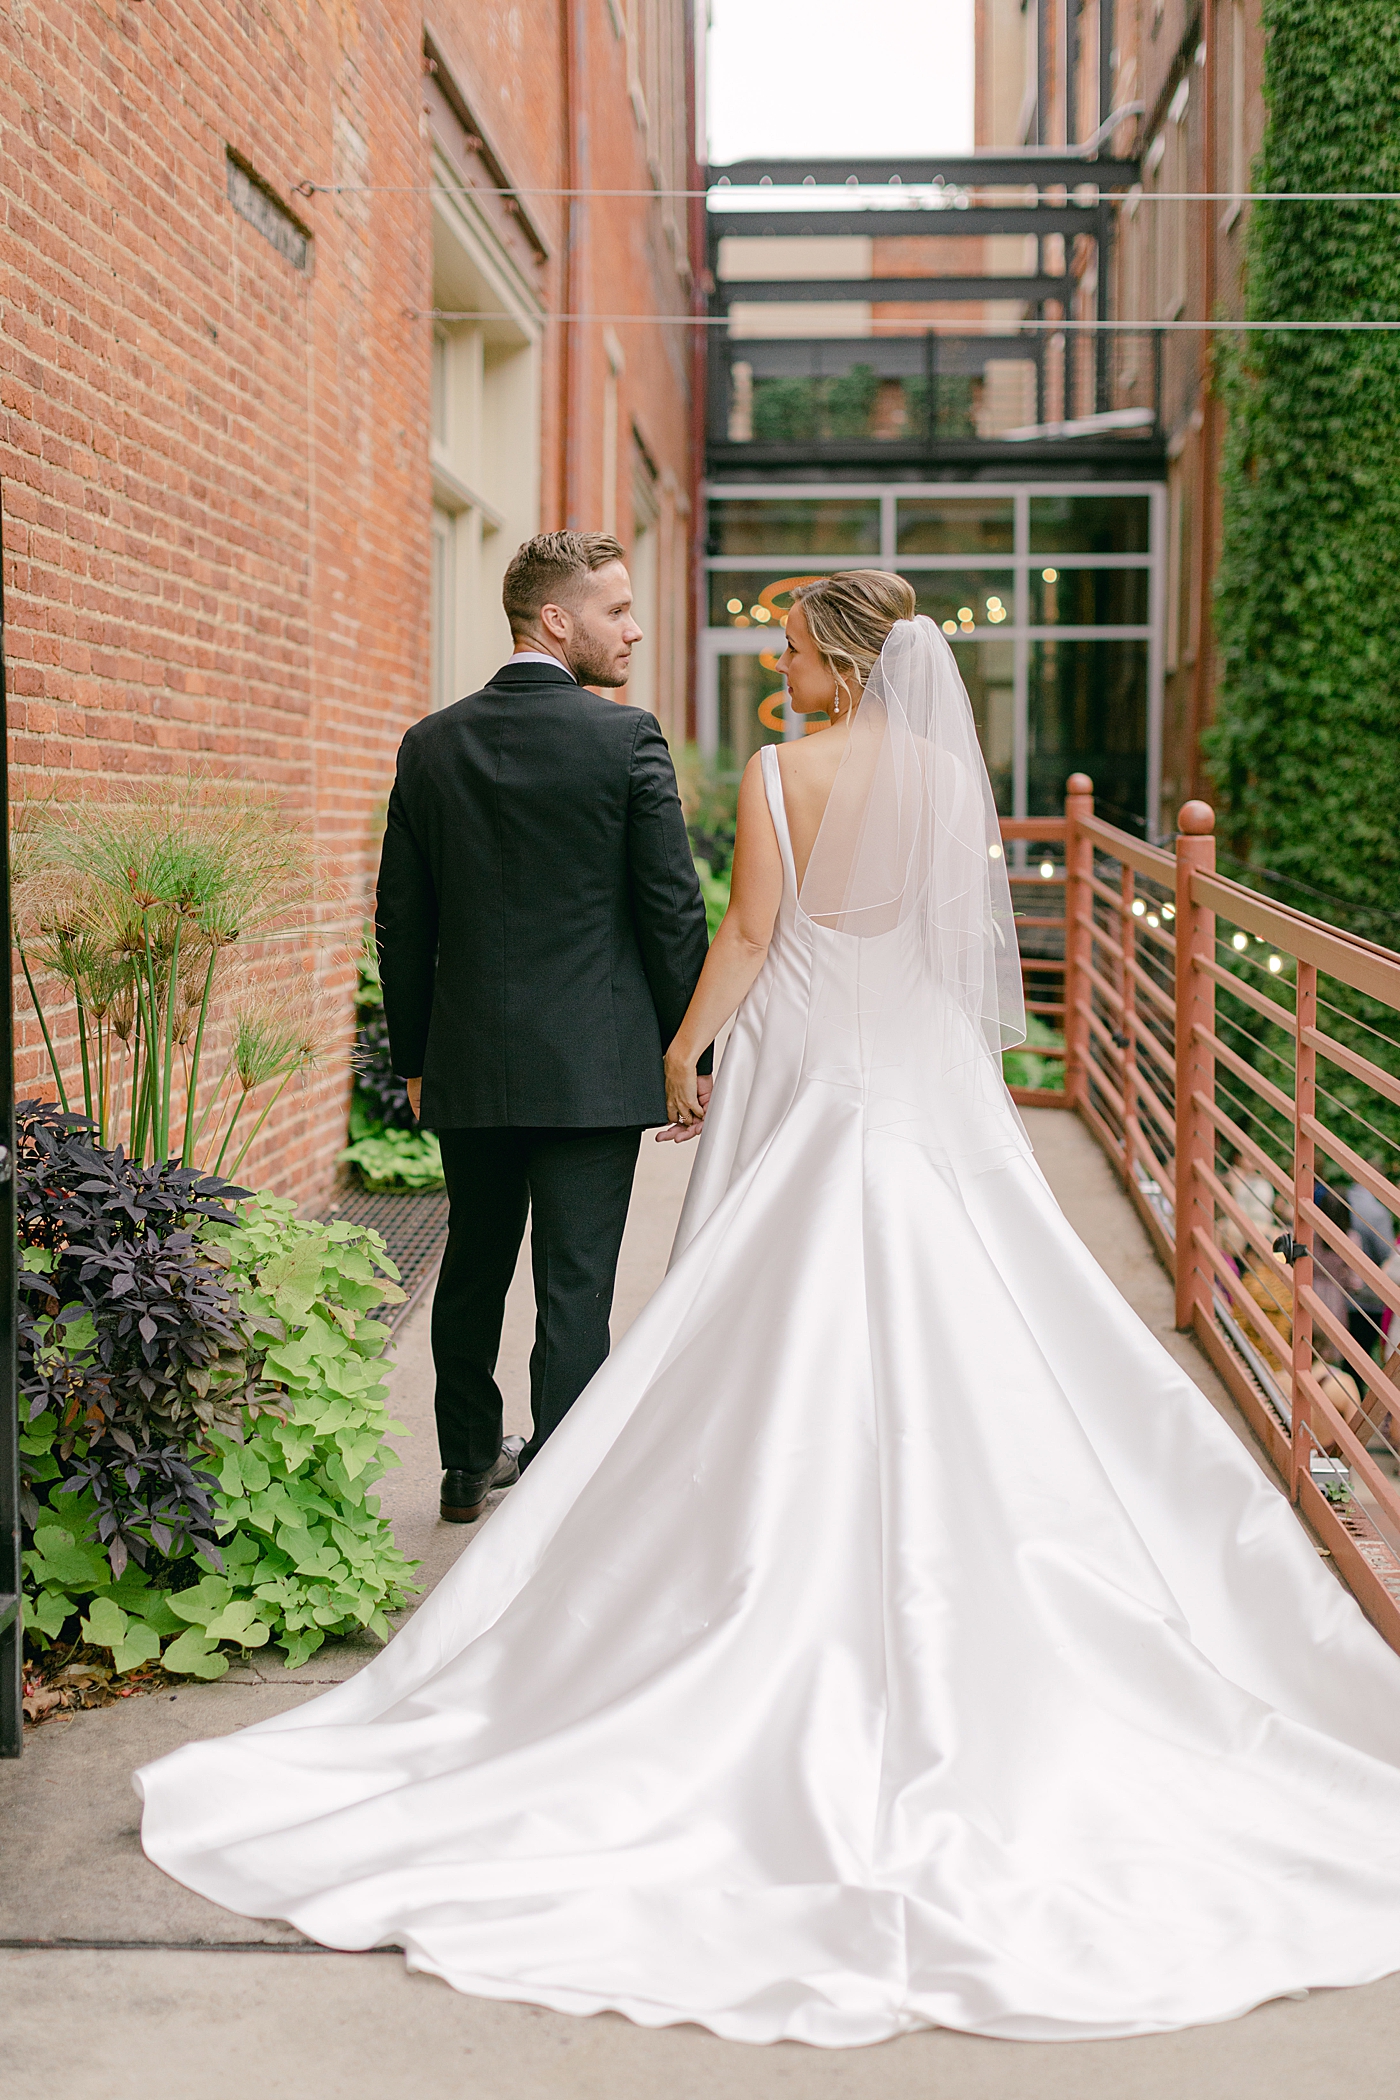 Bride and groom walking hand in hand | Photo by Hope Helmuth Photography